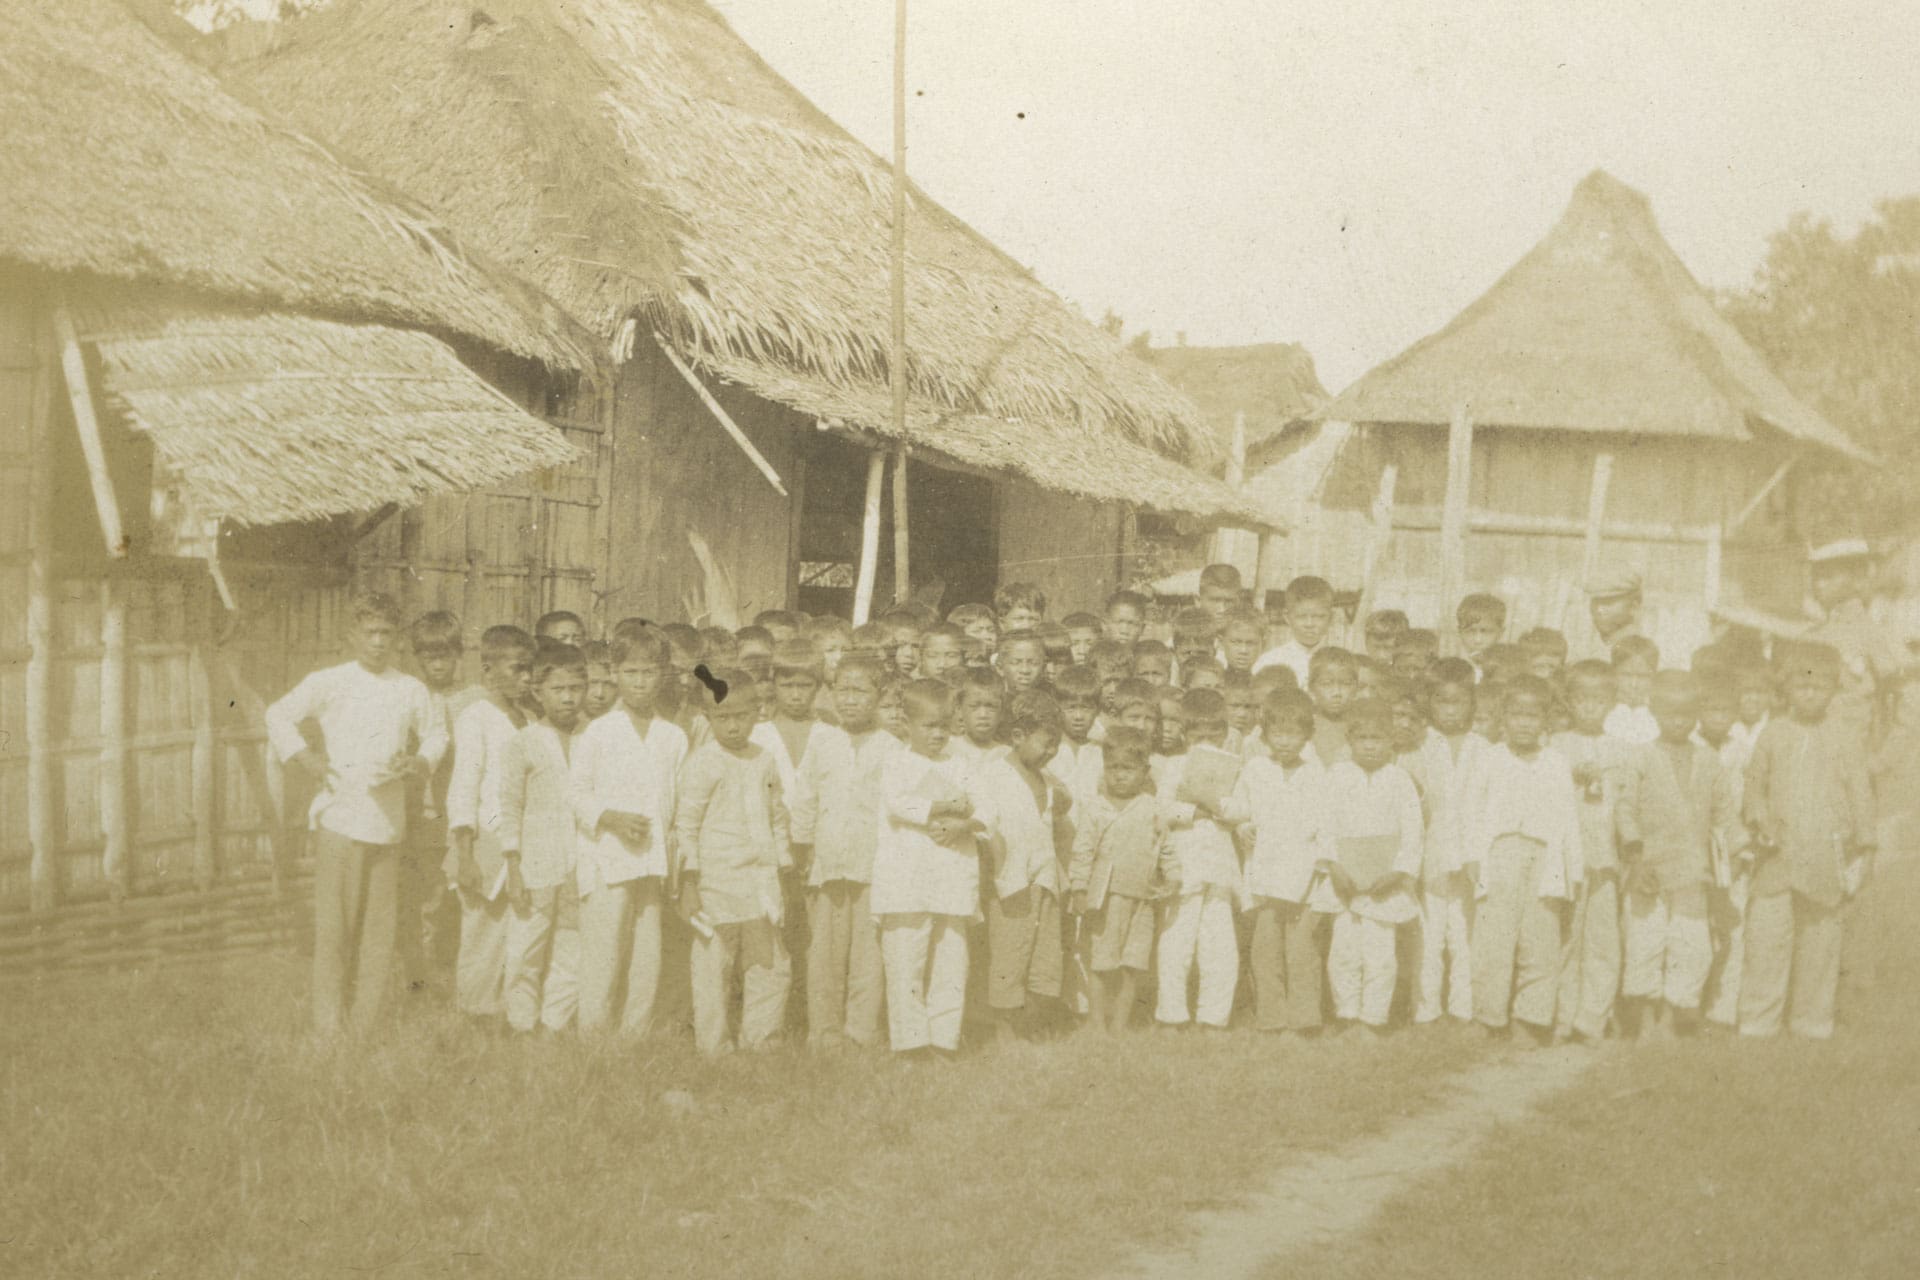 A group of school children in the early twentieth century Philippines.